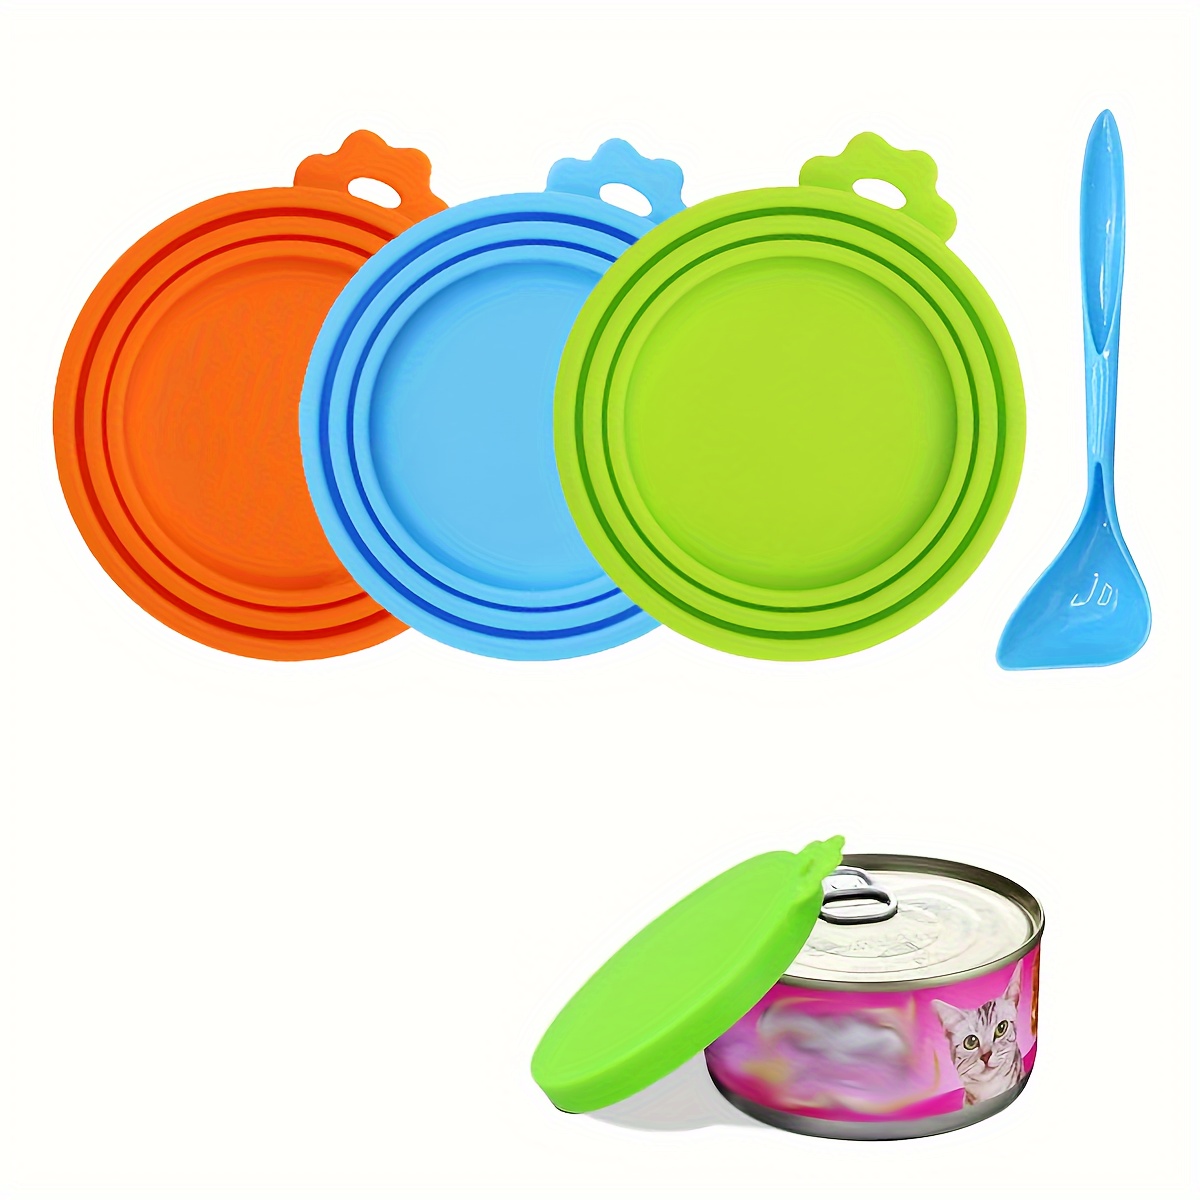 

4pcs Pet Food Can Cover Silicone Can Lids For Dog And Cat Food (universal Size, 1 Fit 3 Standard Size Food Cans) - 3 Pack & Spoon, Multi-colored